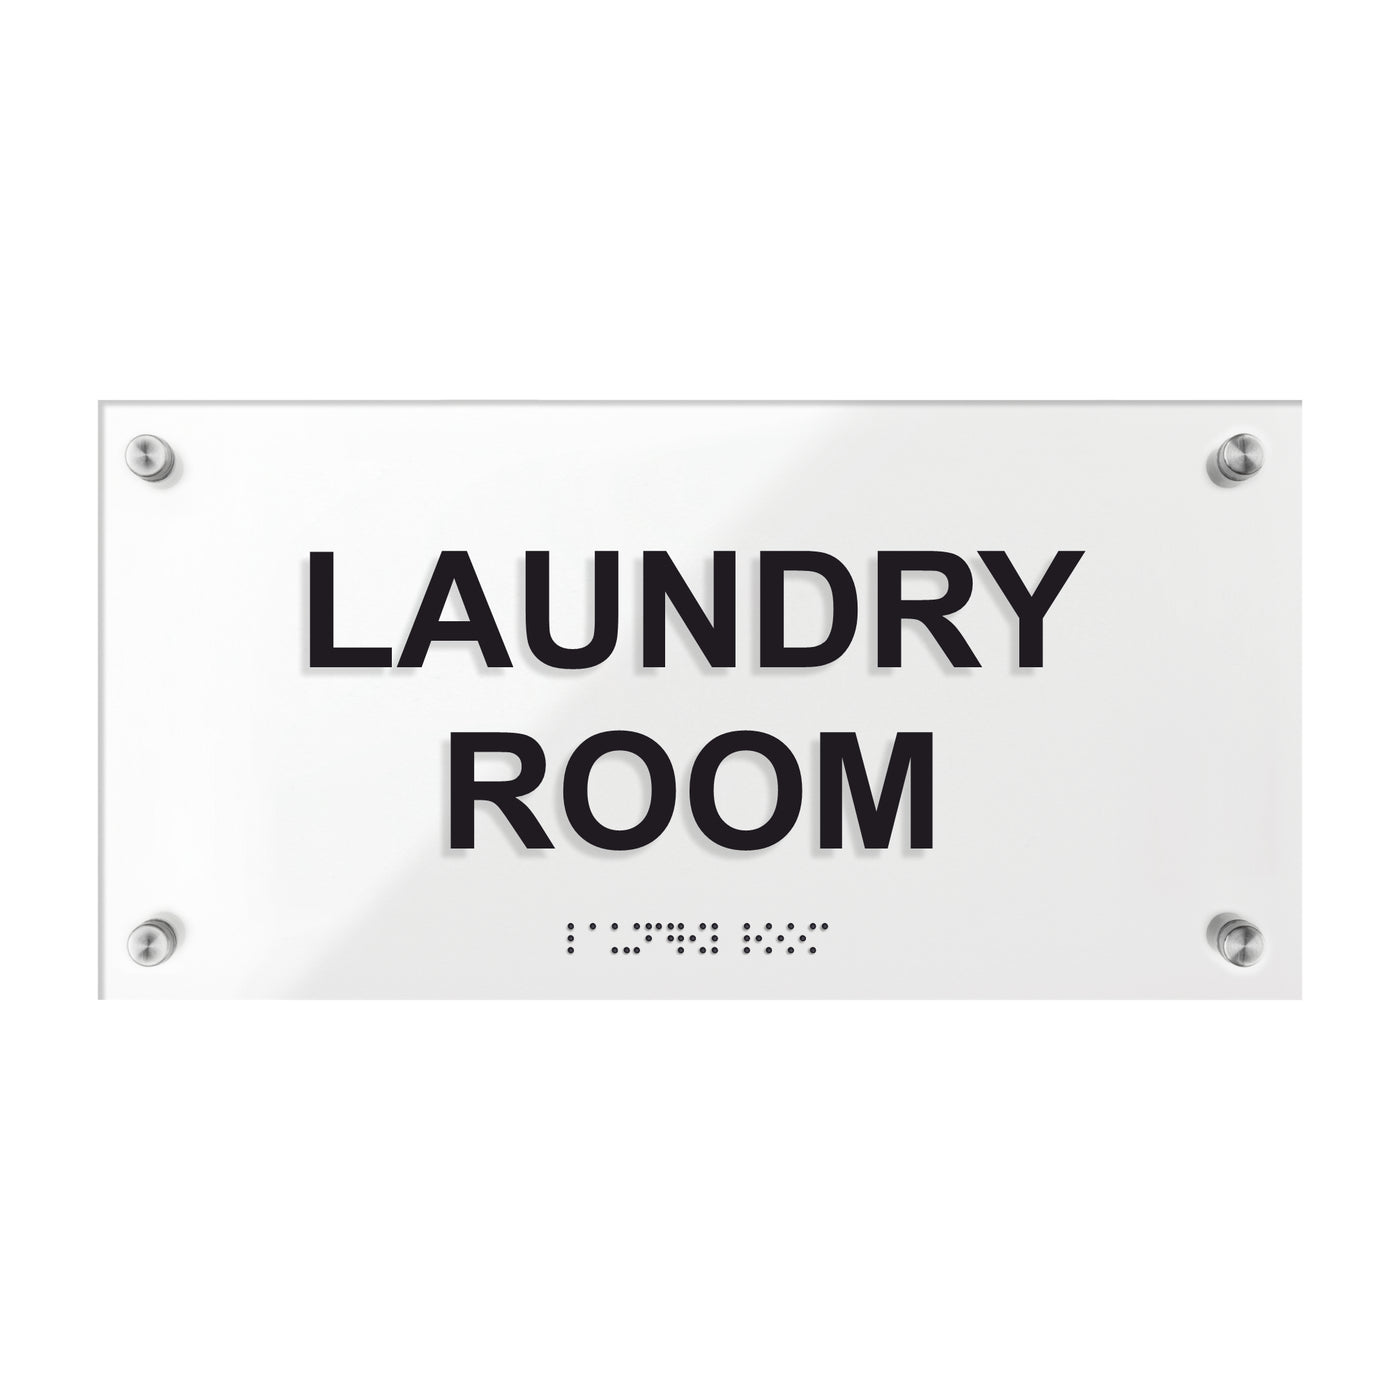 Laundry Room Sign - Acrylic Plate "Classic" Design